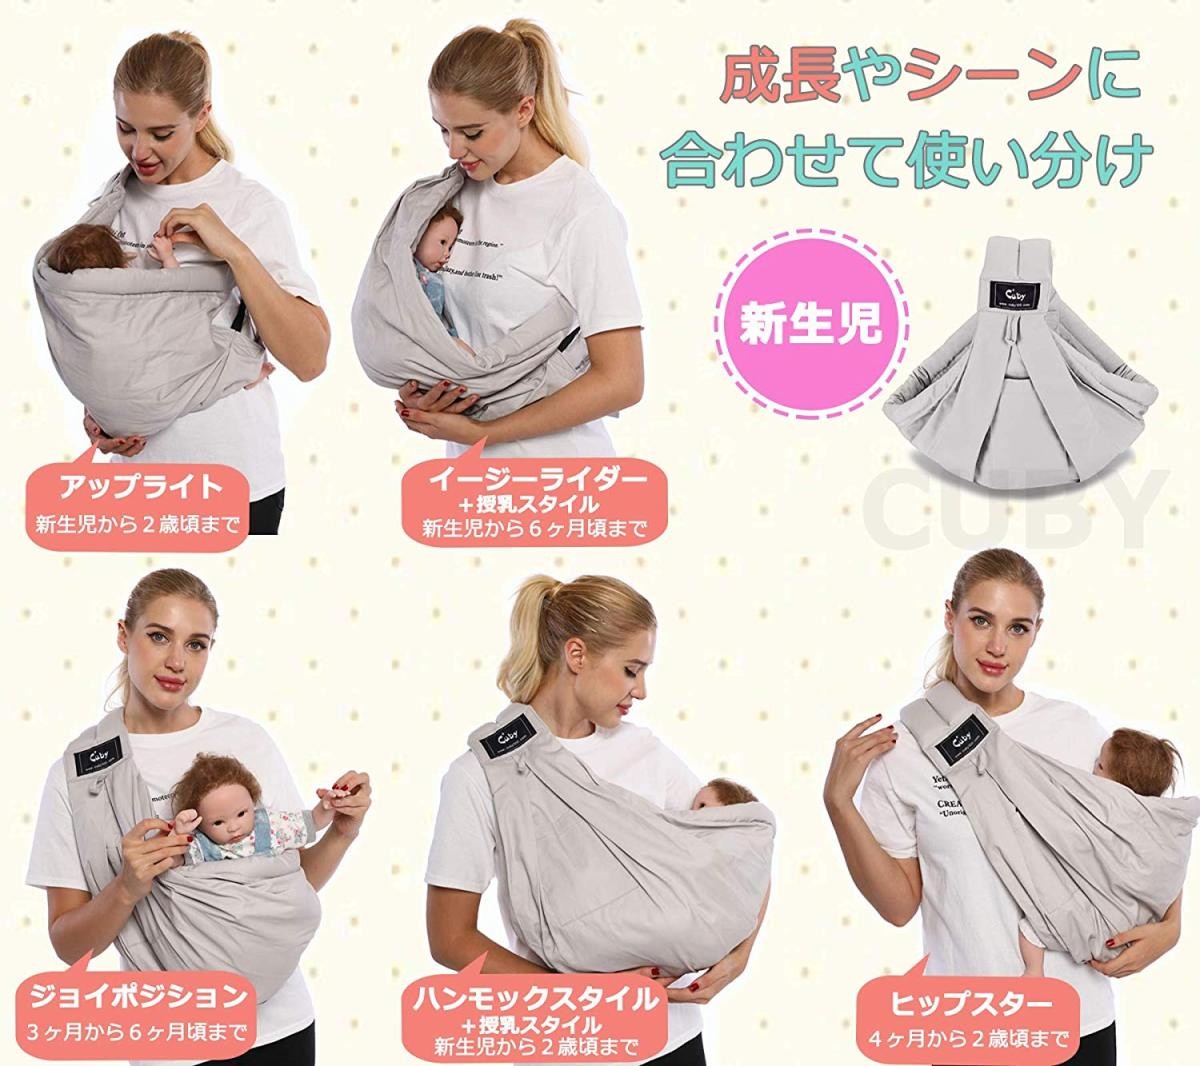 Cuby baby sling baby carrier ... string newborn baby object 0~2 -years old one-side shoulder Japan domestic safety standard conform goods instructions equipped ( gray )